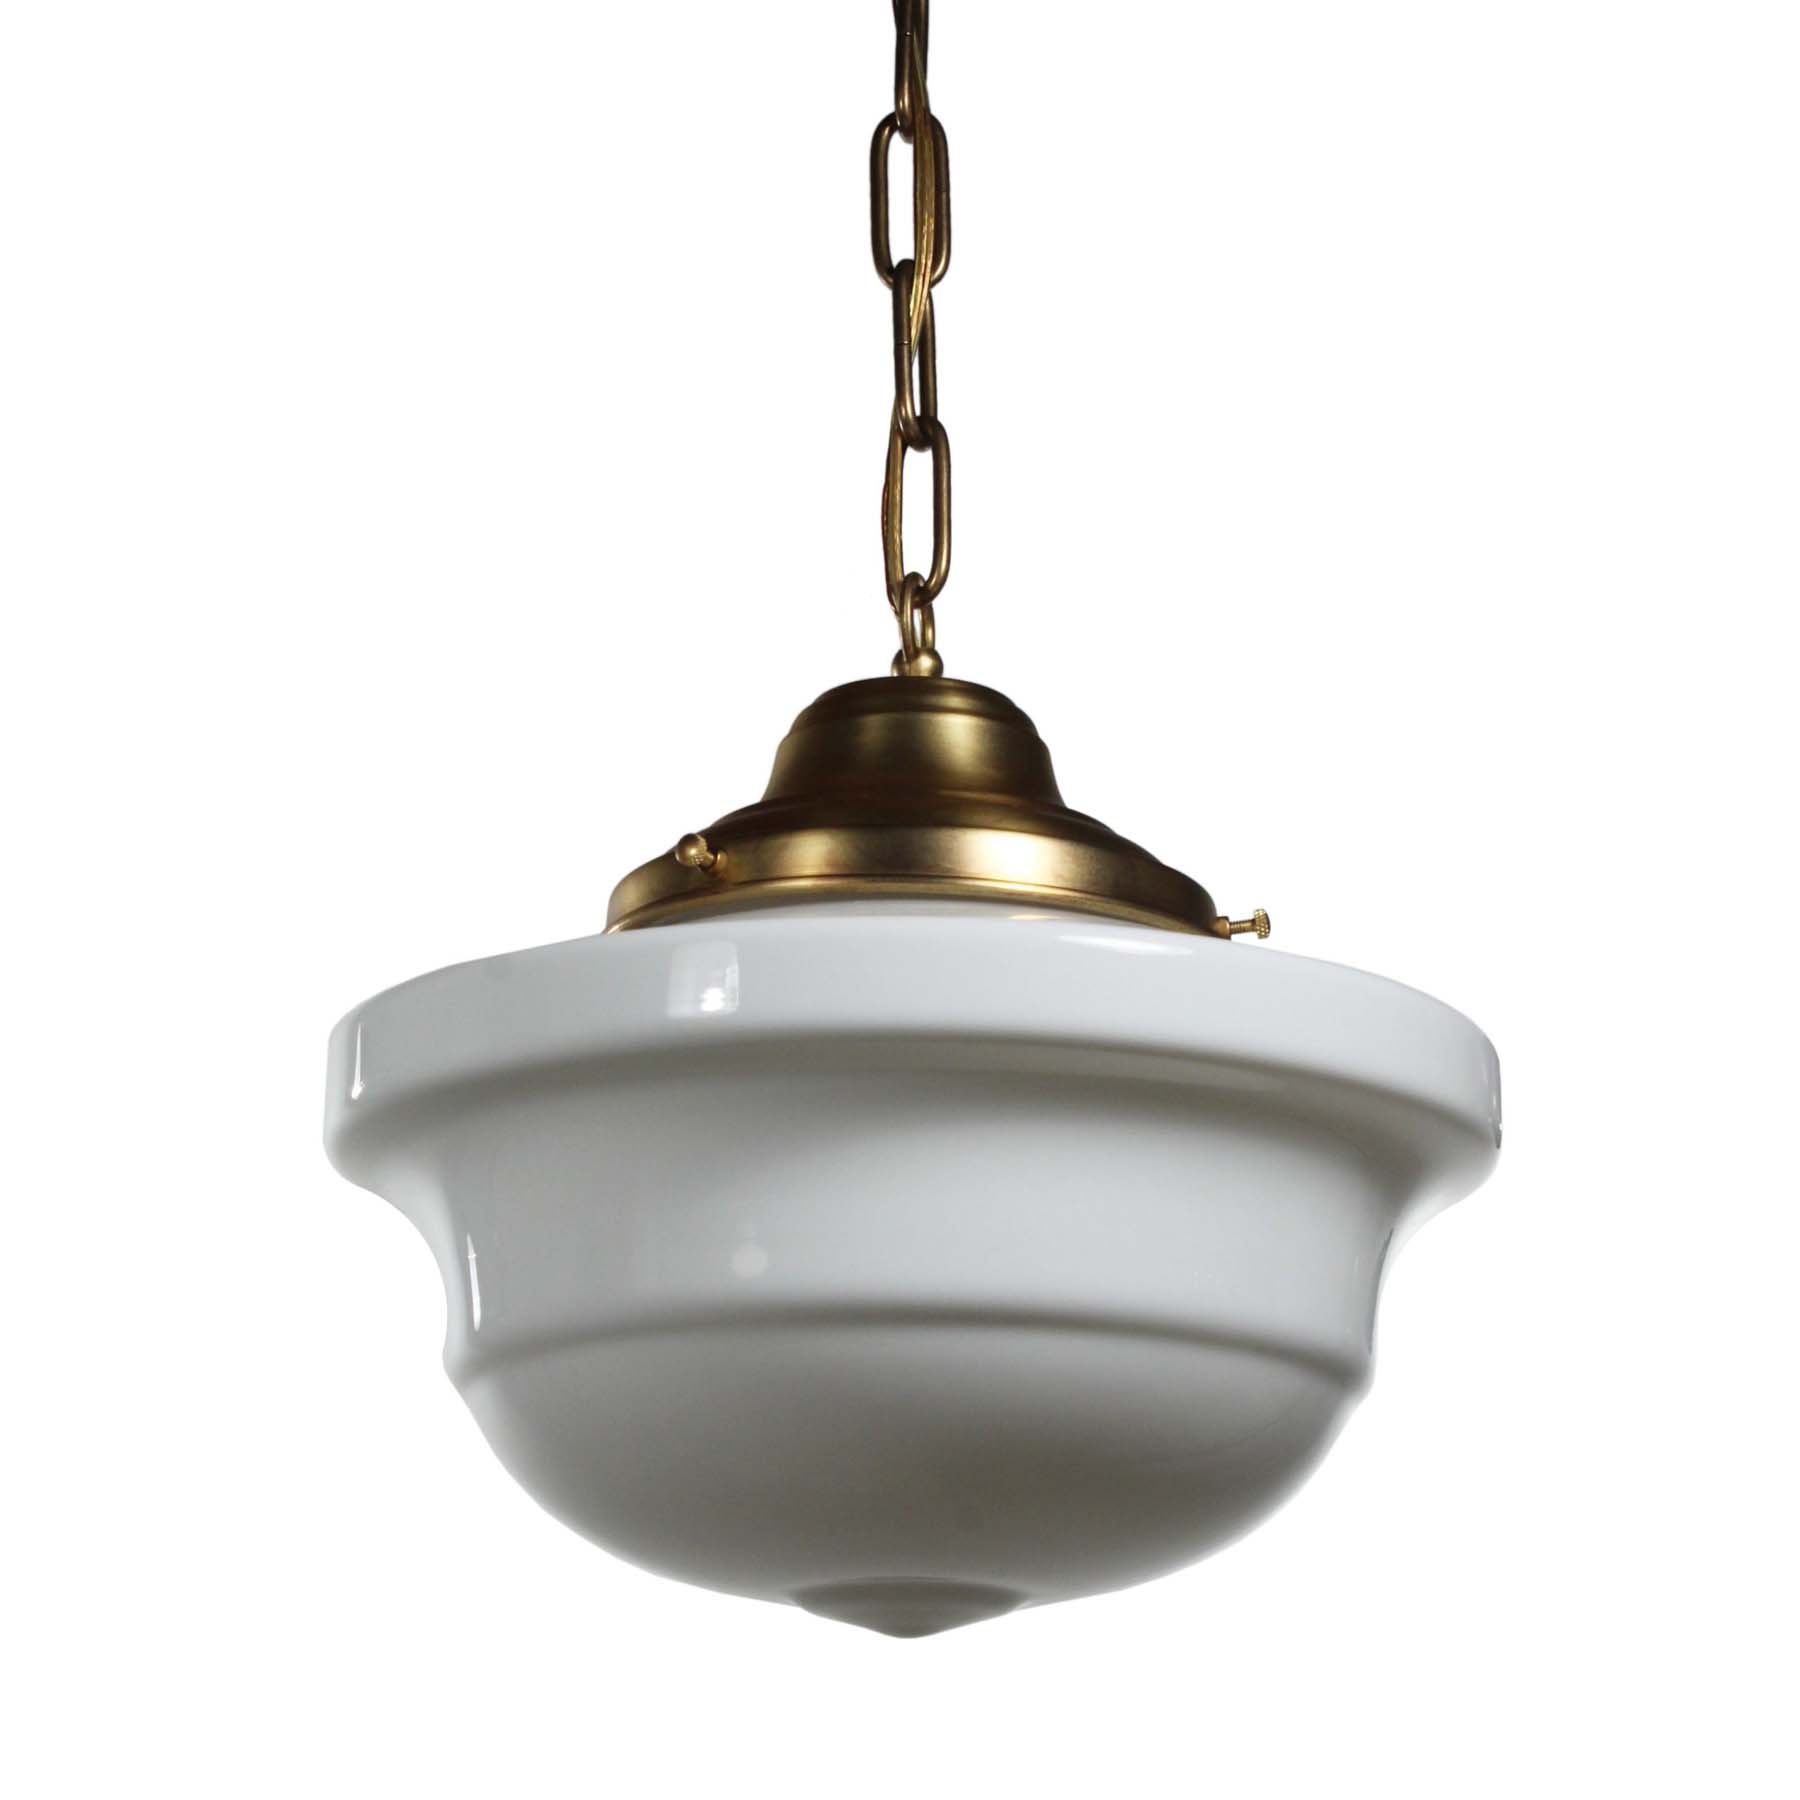 Antique Brass Schoolhouse Pendant Lights with Unusual Shade-70840